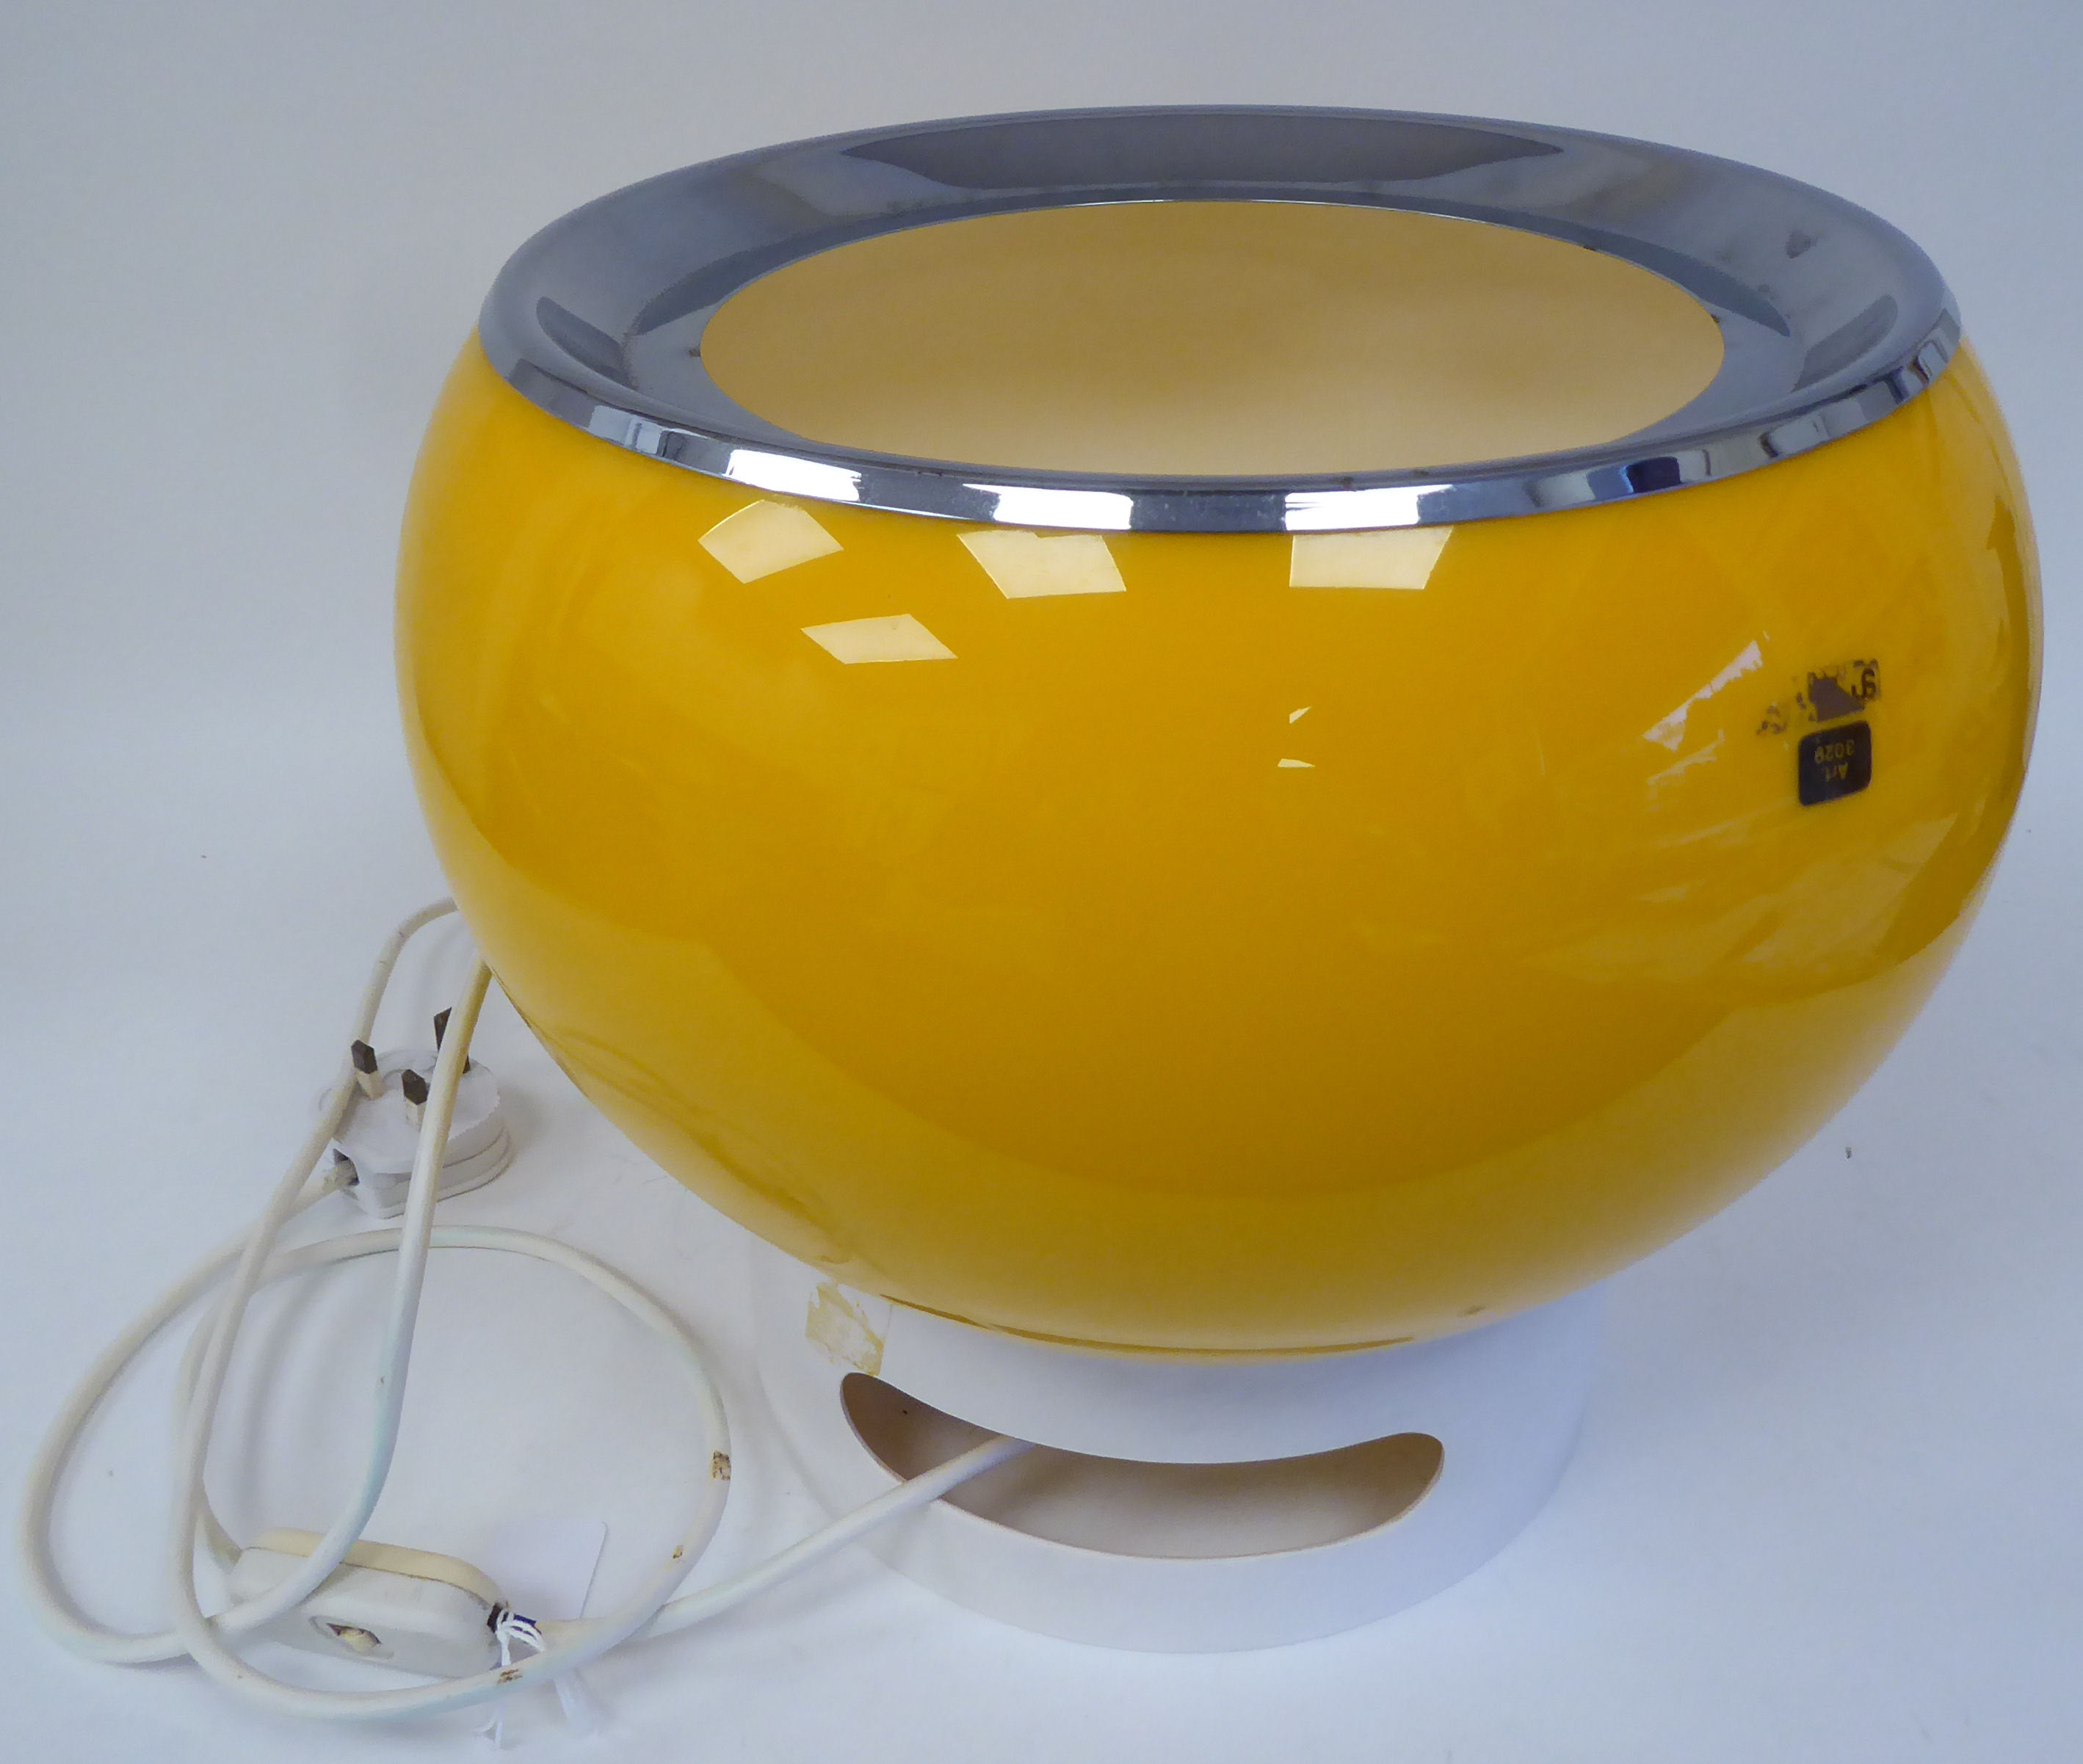 A vintage 1970s 'Glan' Harvey Guzzini lamp, in yellow and white with a chromium plated rim  12"h - Image 2 of 4